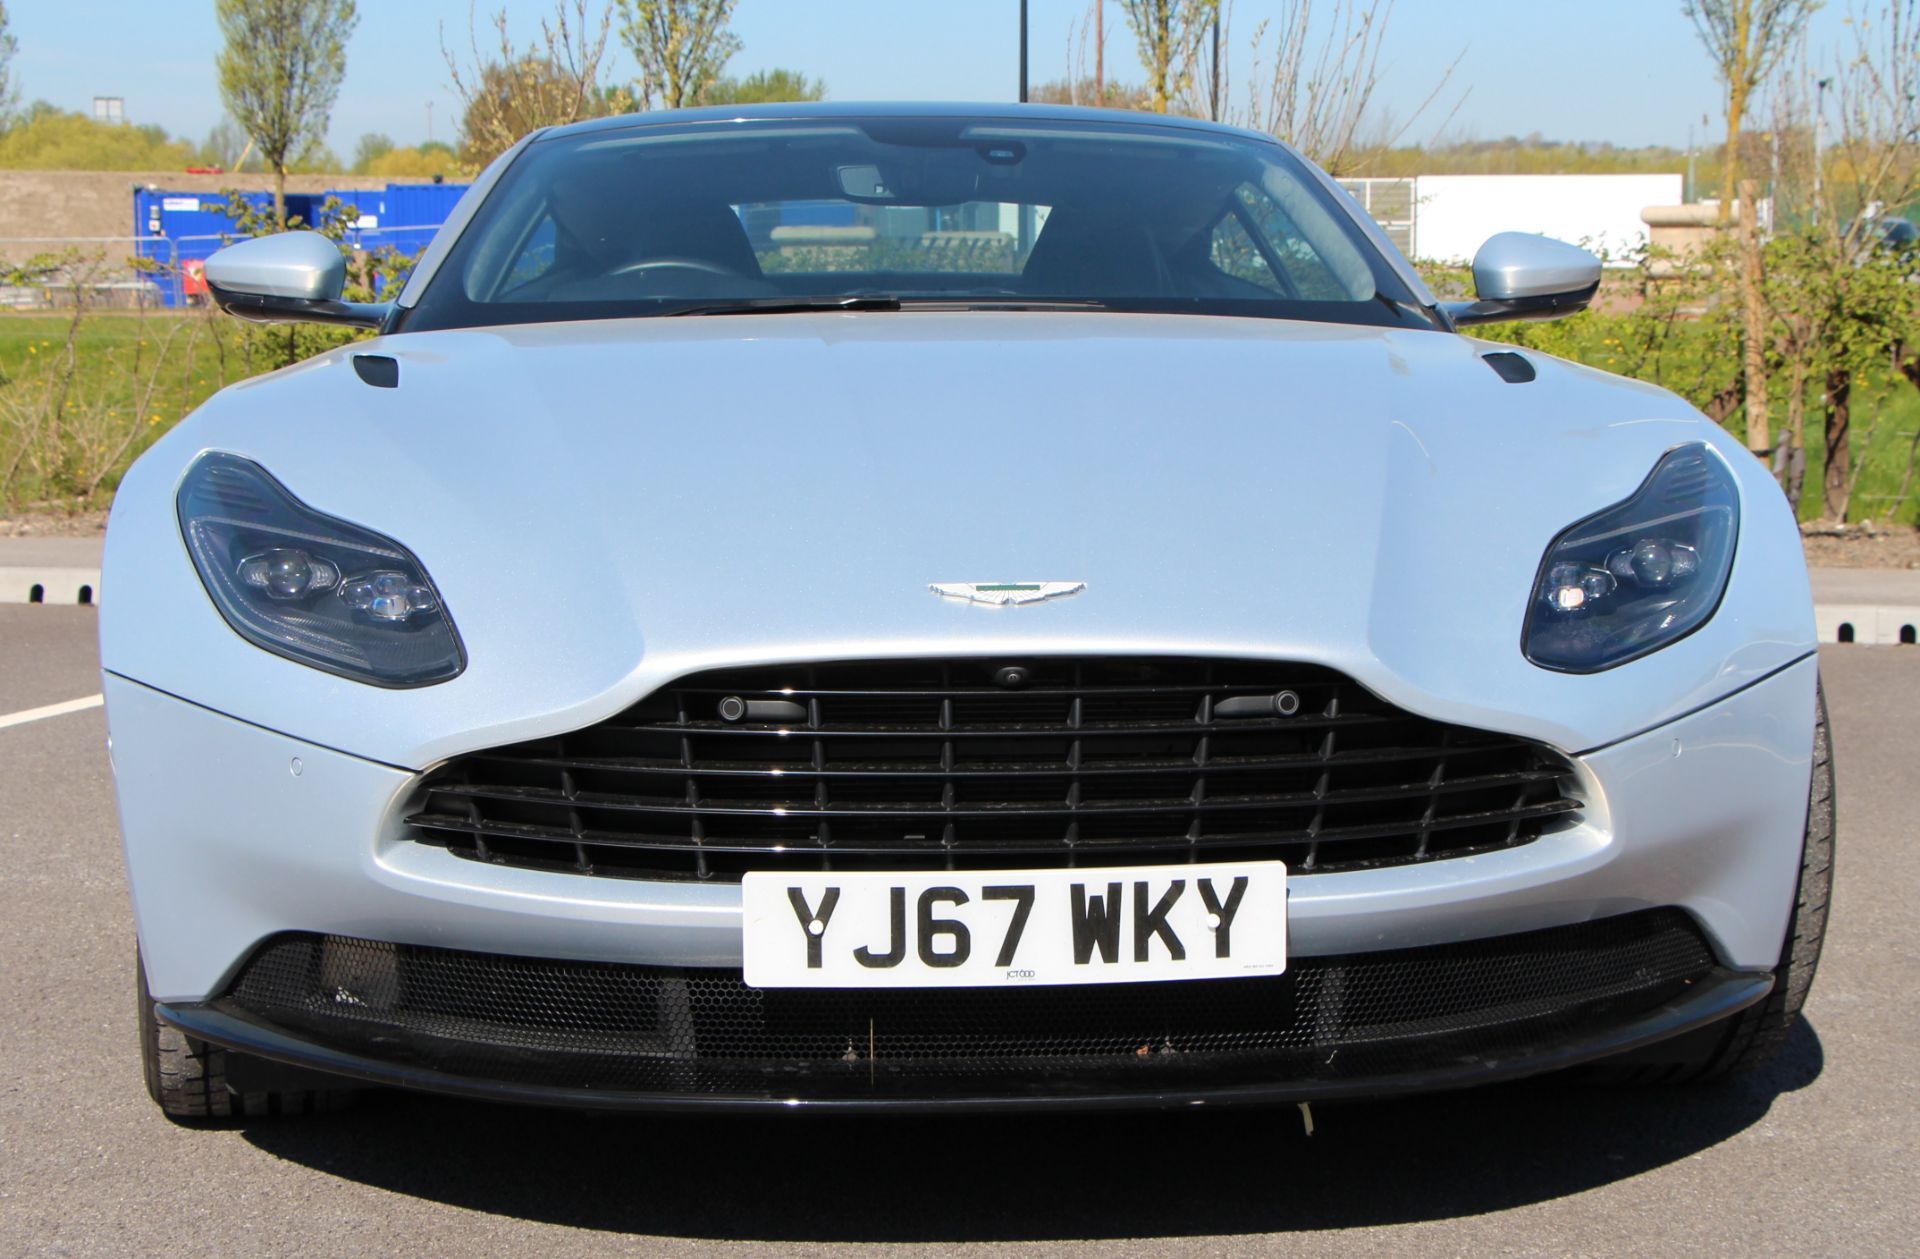 ASTON MARTIN DB11 V8 AUTOMATIC (3982cc) COUPE - 8 speed automatic - petrol - silver - dark - Image 23 of 68